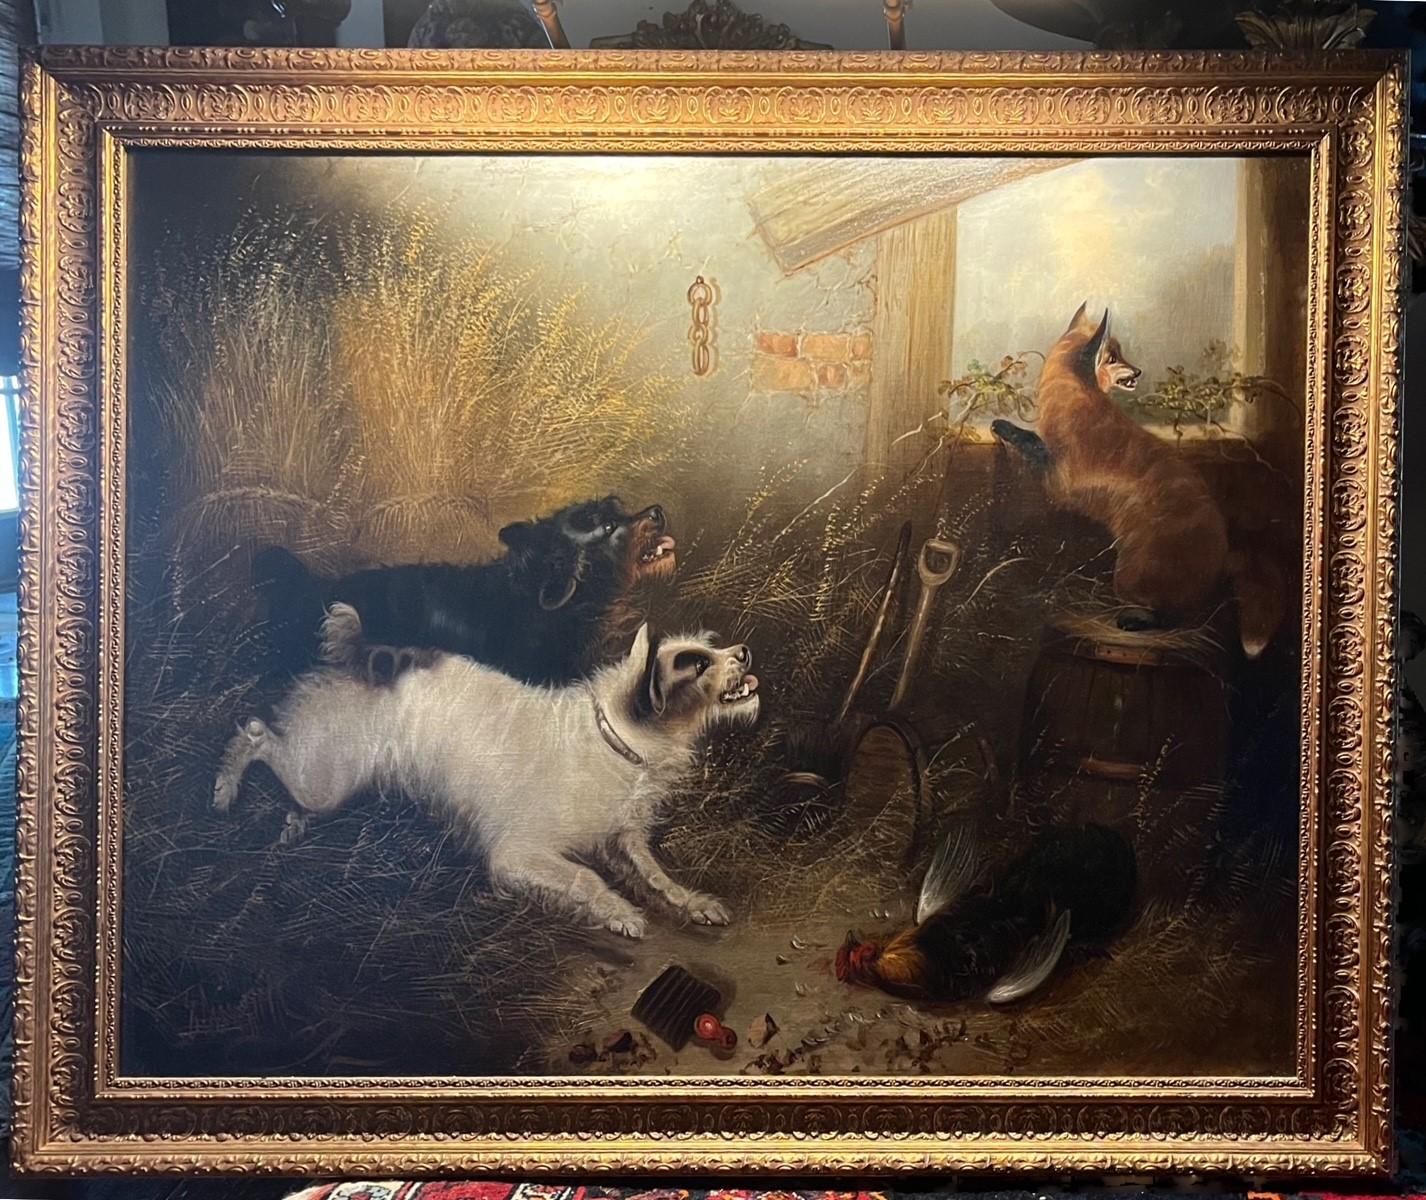 Large 19th Century English Oil Painting -Chasing the Fox- signed E. Armfield

Large, signed painting in oil on canvas. It features two dogs chasing a fox away from a rooster. The painting is executed in the highest artistic perfection with intricate